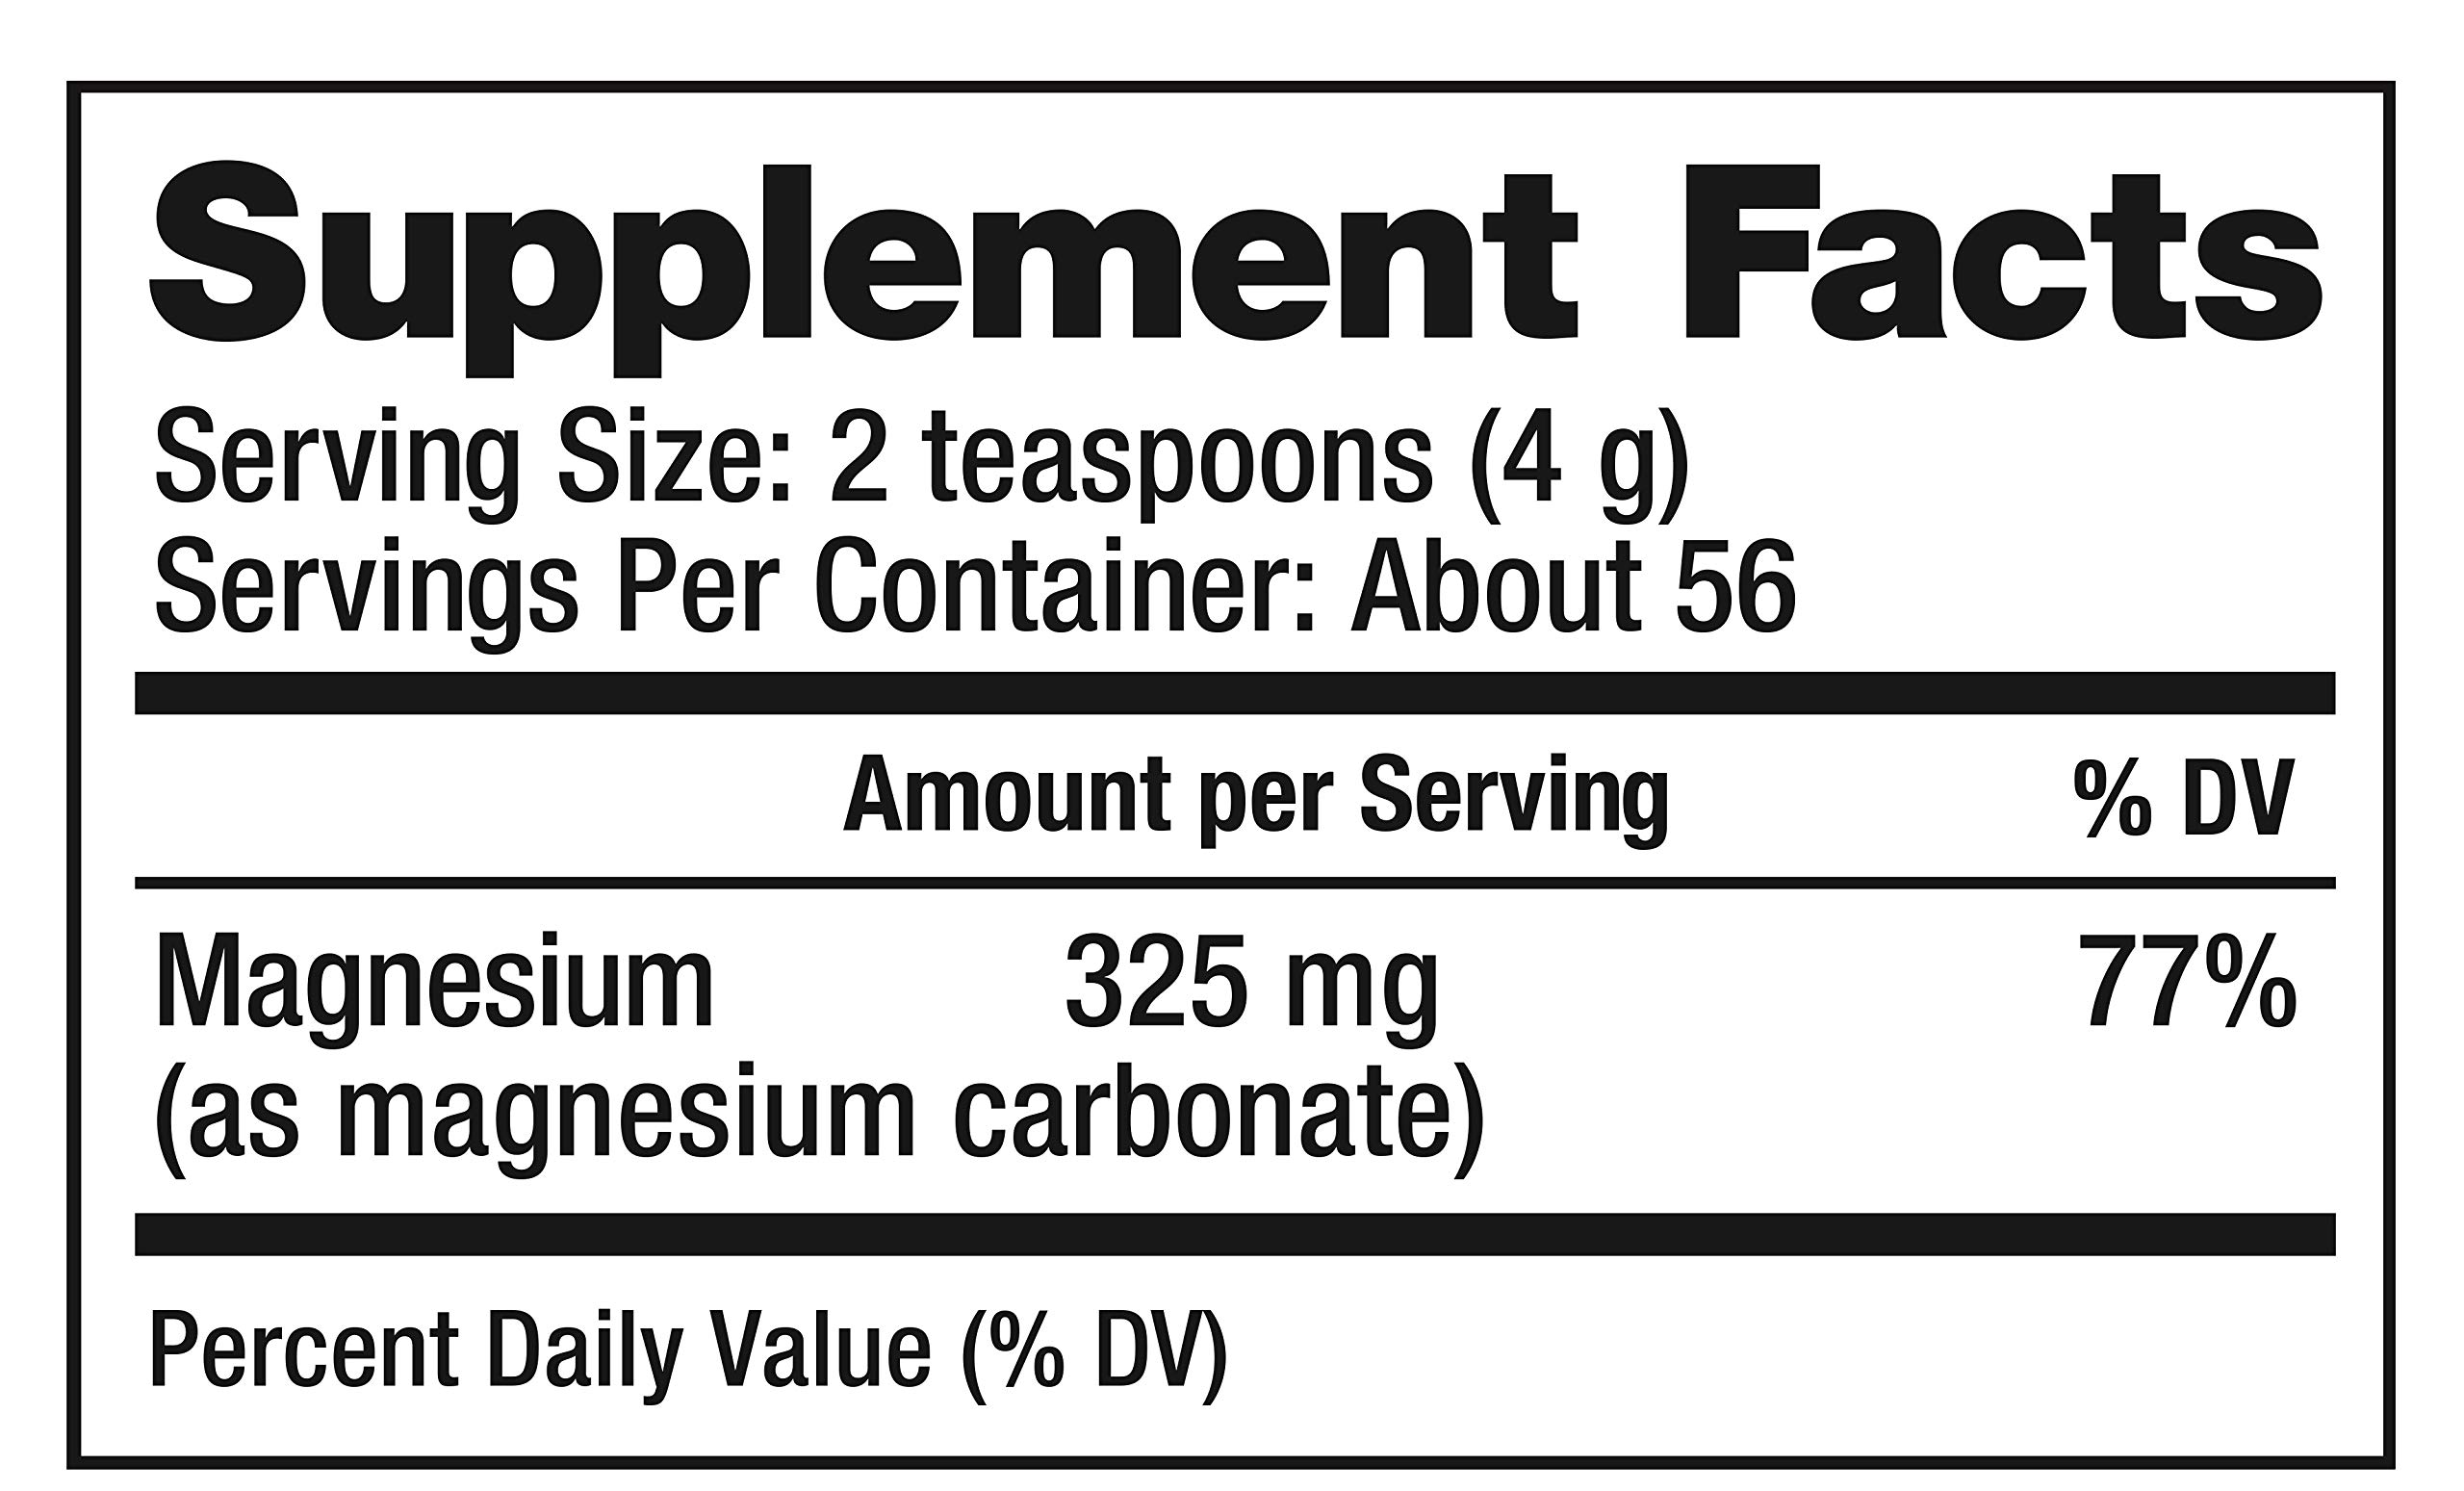 Natural Vitality Calm, Magnesium Supplement, Anti-Stress Drink Mix Powder, Original, Raspberry Lemon - 8 Ounce (Packaging May Vary)